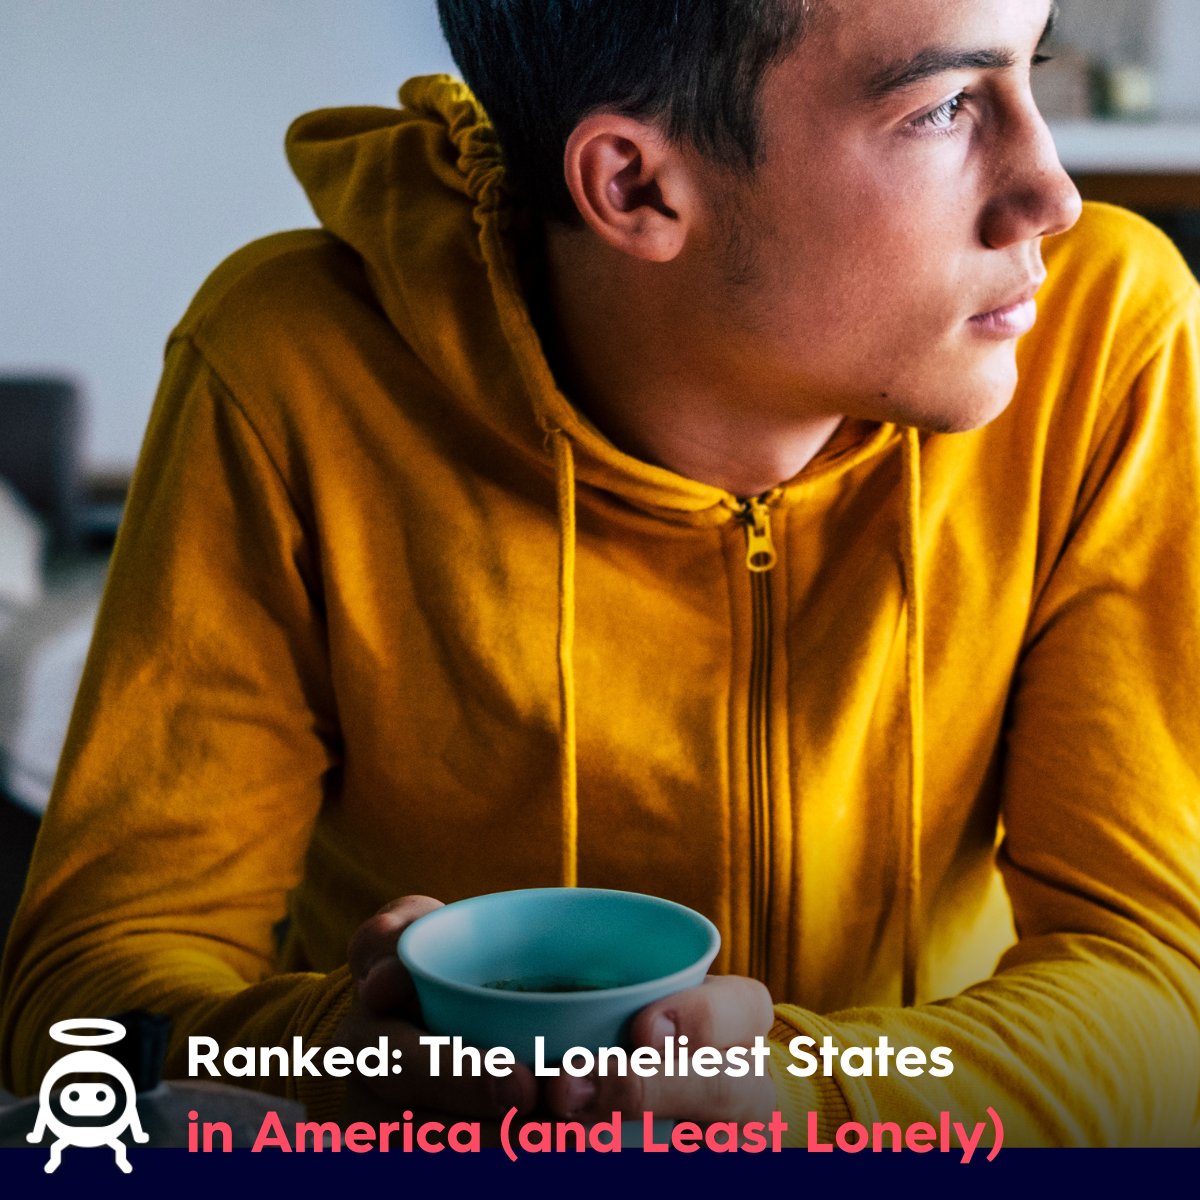 Are you lonely? You're not alone! Experts say these are the loneliest states in America: bit.ly/3w1tJkL #mentalhealth #loneliness #lonely